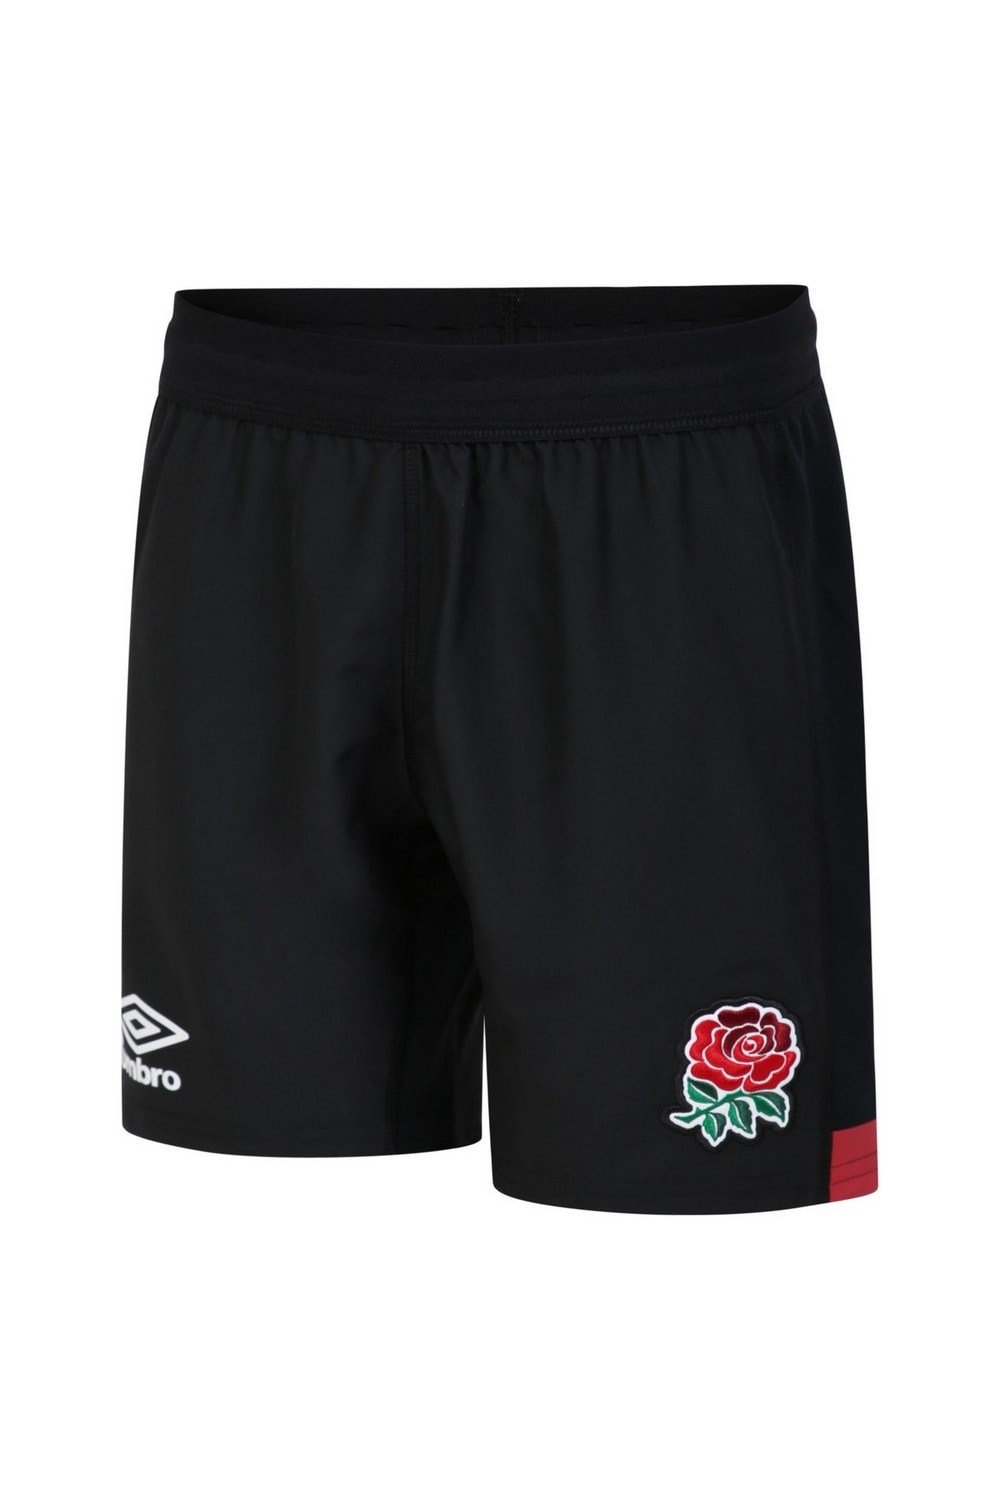 England Rugby 22/23 Kids 7s Alternate Shorts -